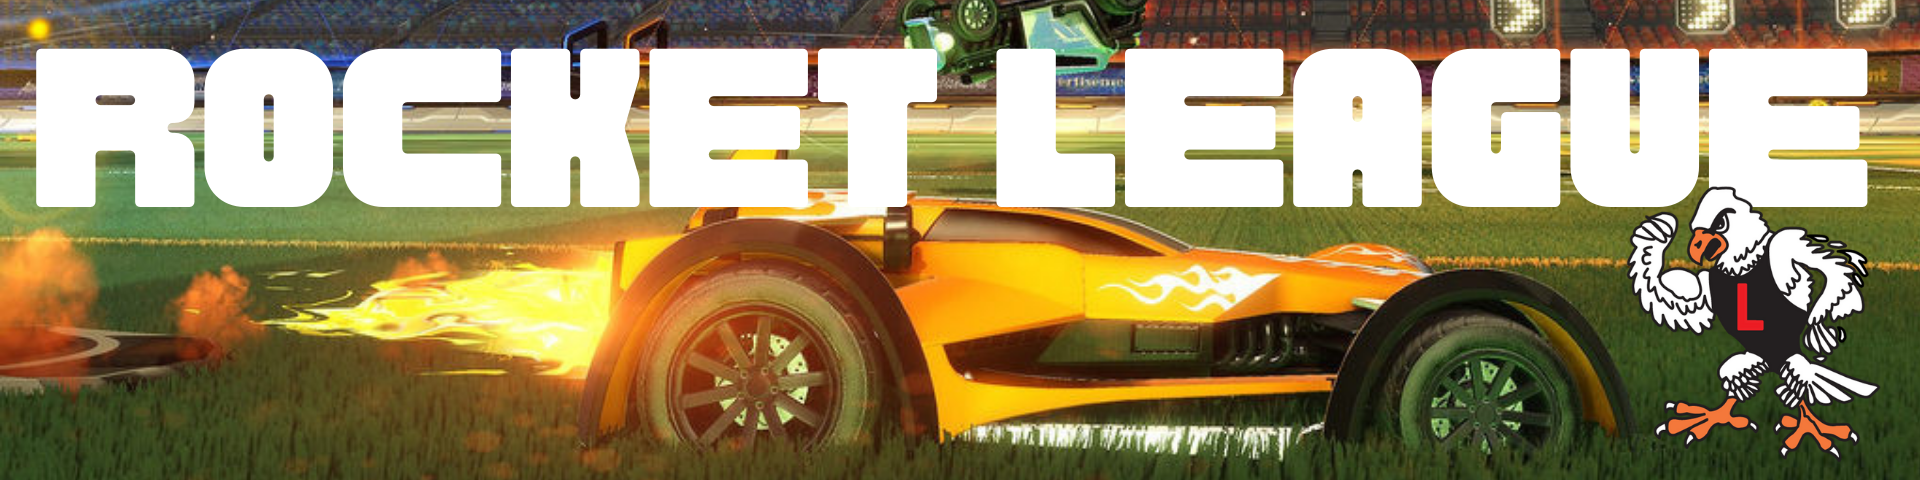 Image of car from Rocket League